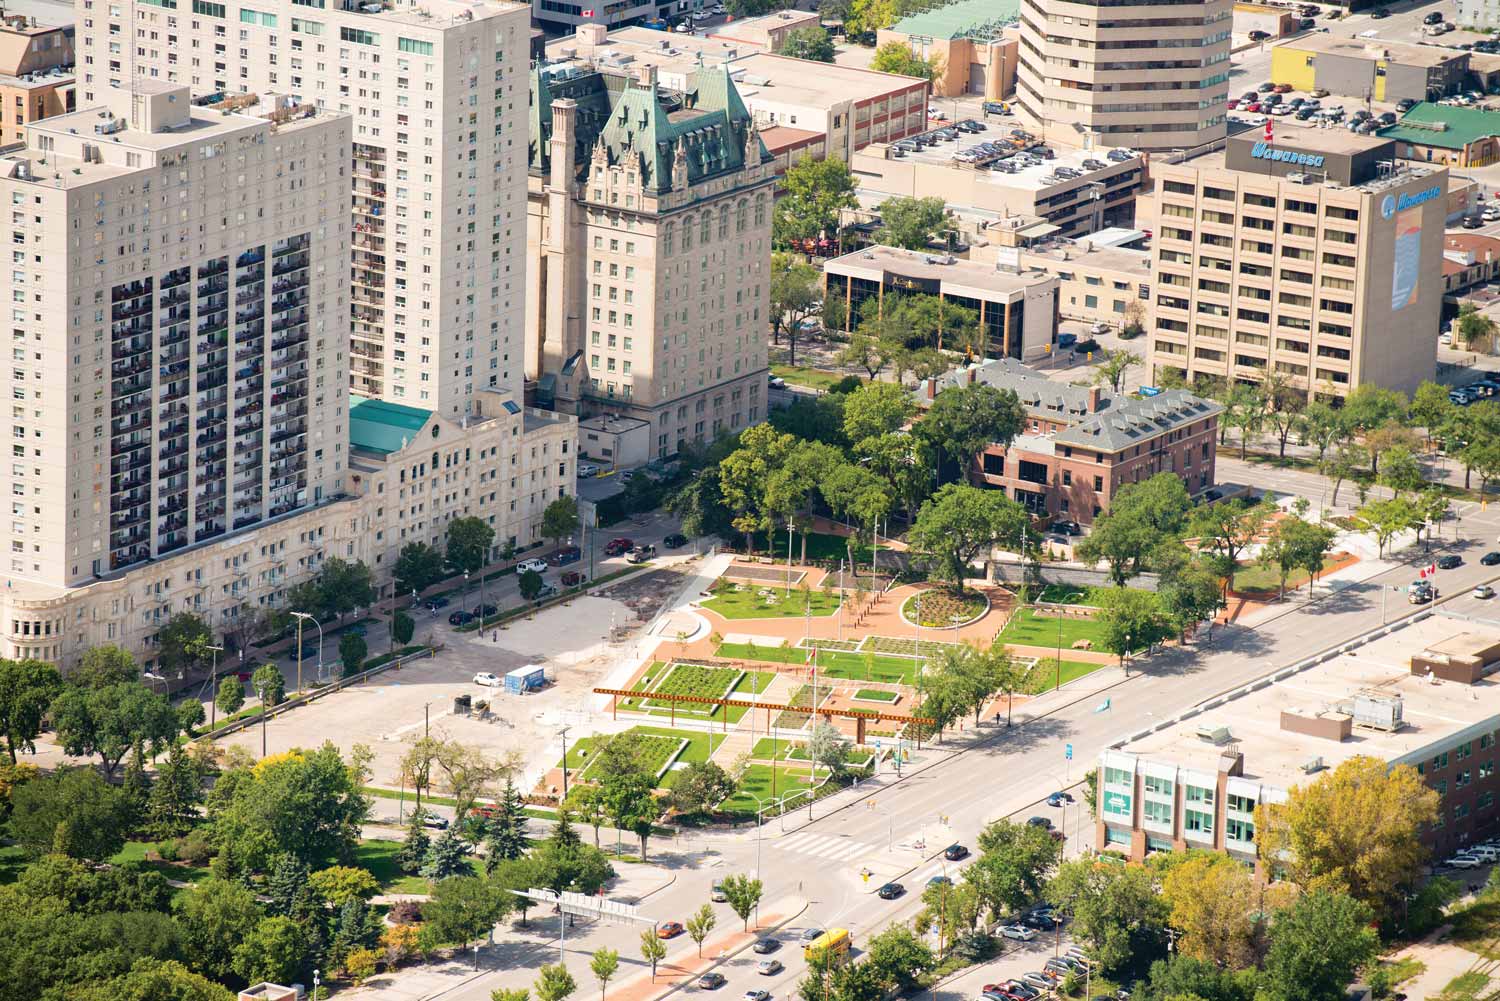 Aerial view of Upper Fort Garry Provincial Park in the summer. It is wedge shaped, with paths and gardens. Main street is to its right.